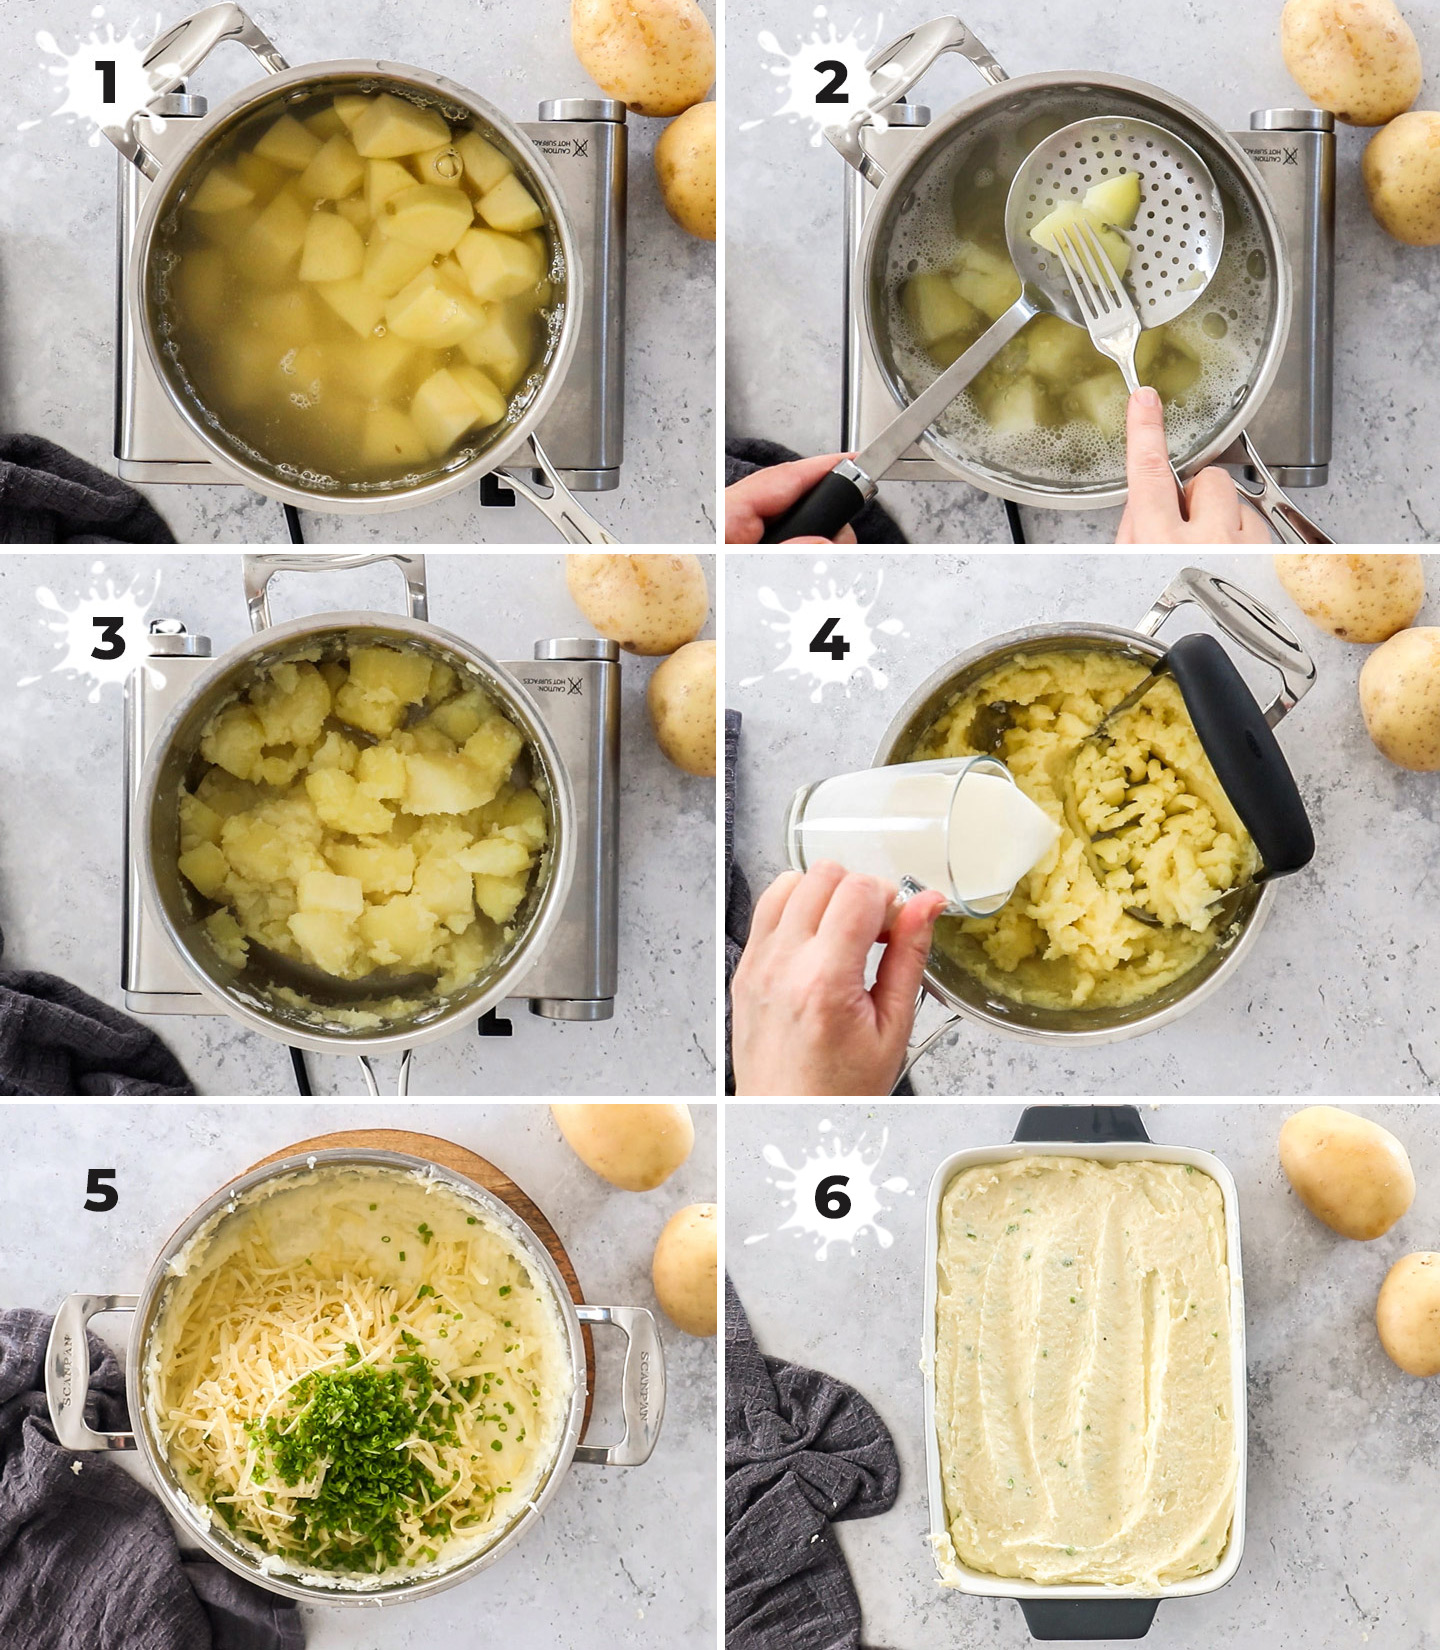 A collage showing how to make mashed potato bake.